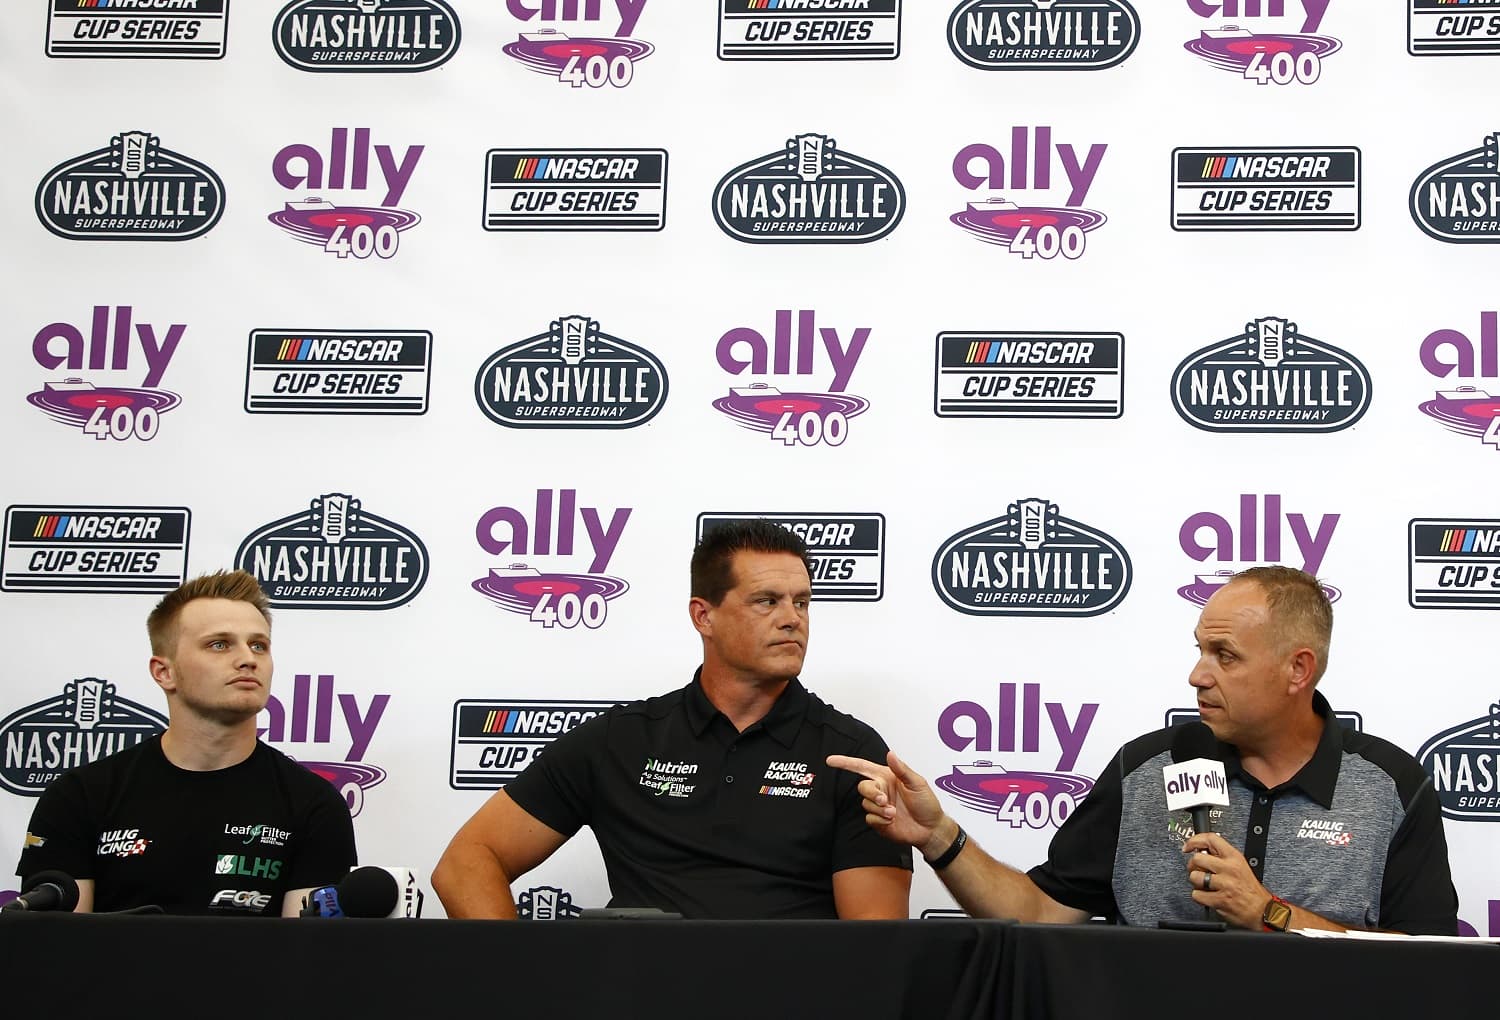 Justin Haley, Matt Kaulig, and Chris Rice announce that Kaulig Racing will race full time in the NASCAR Cup Series season in 2022, during a press conference prior to practice for the NASCAR Xfinity Series Tennessee Lottery 250 at Nashville Superspeedway on June 18, 2021. | Jared C. Tilton/Getty Images